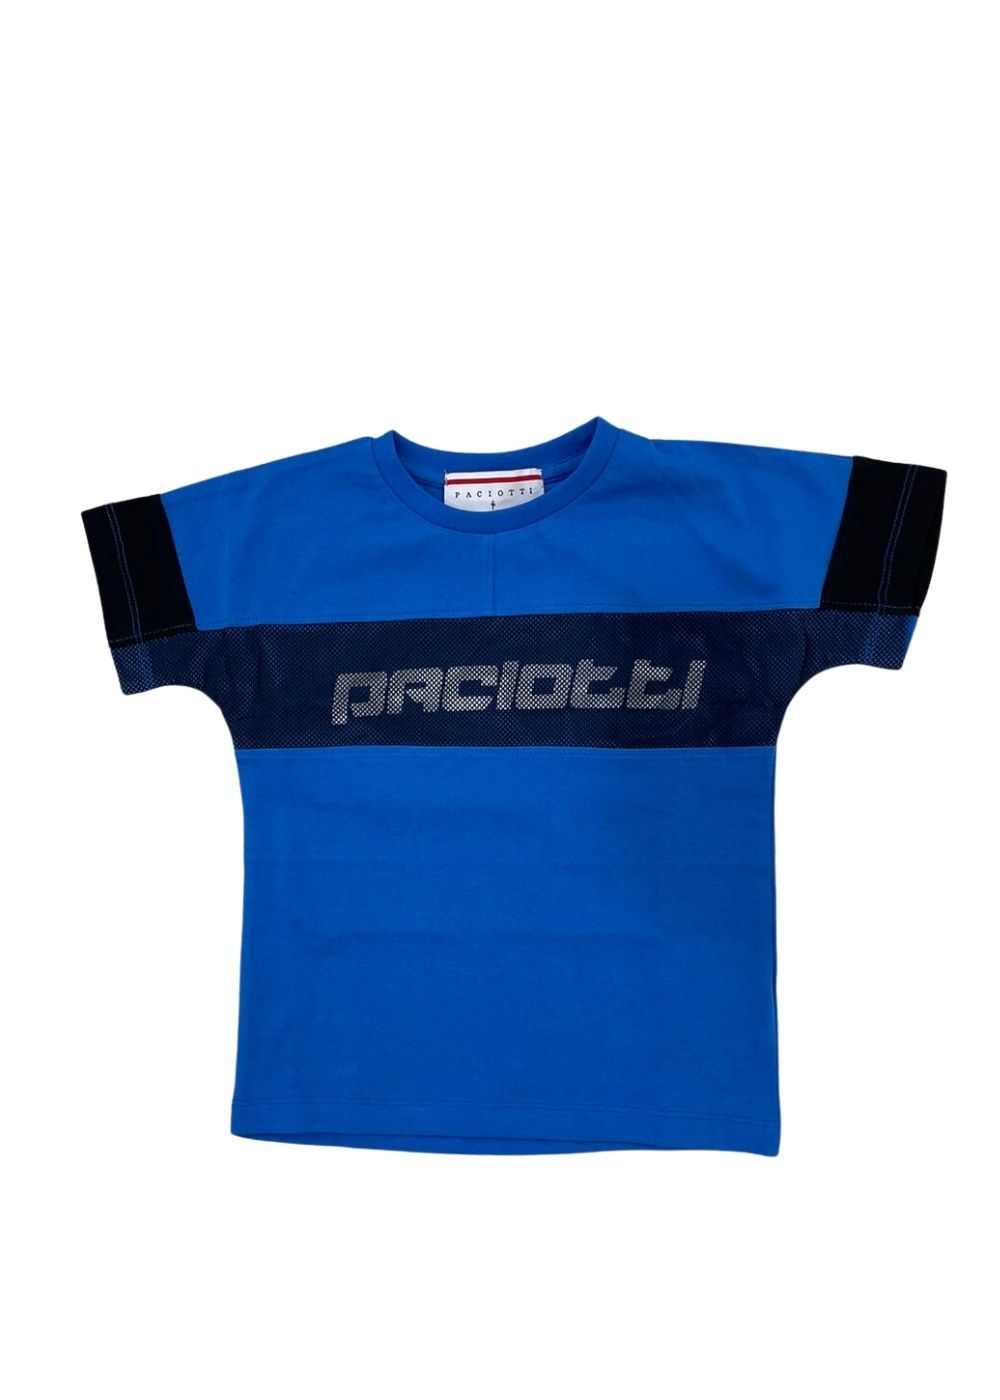 Featured image for “Paciotti 4Us T-shirt con logo”